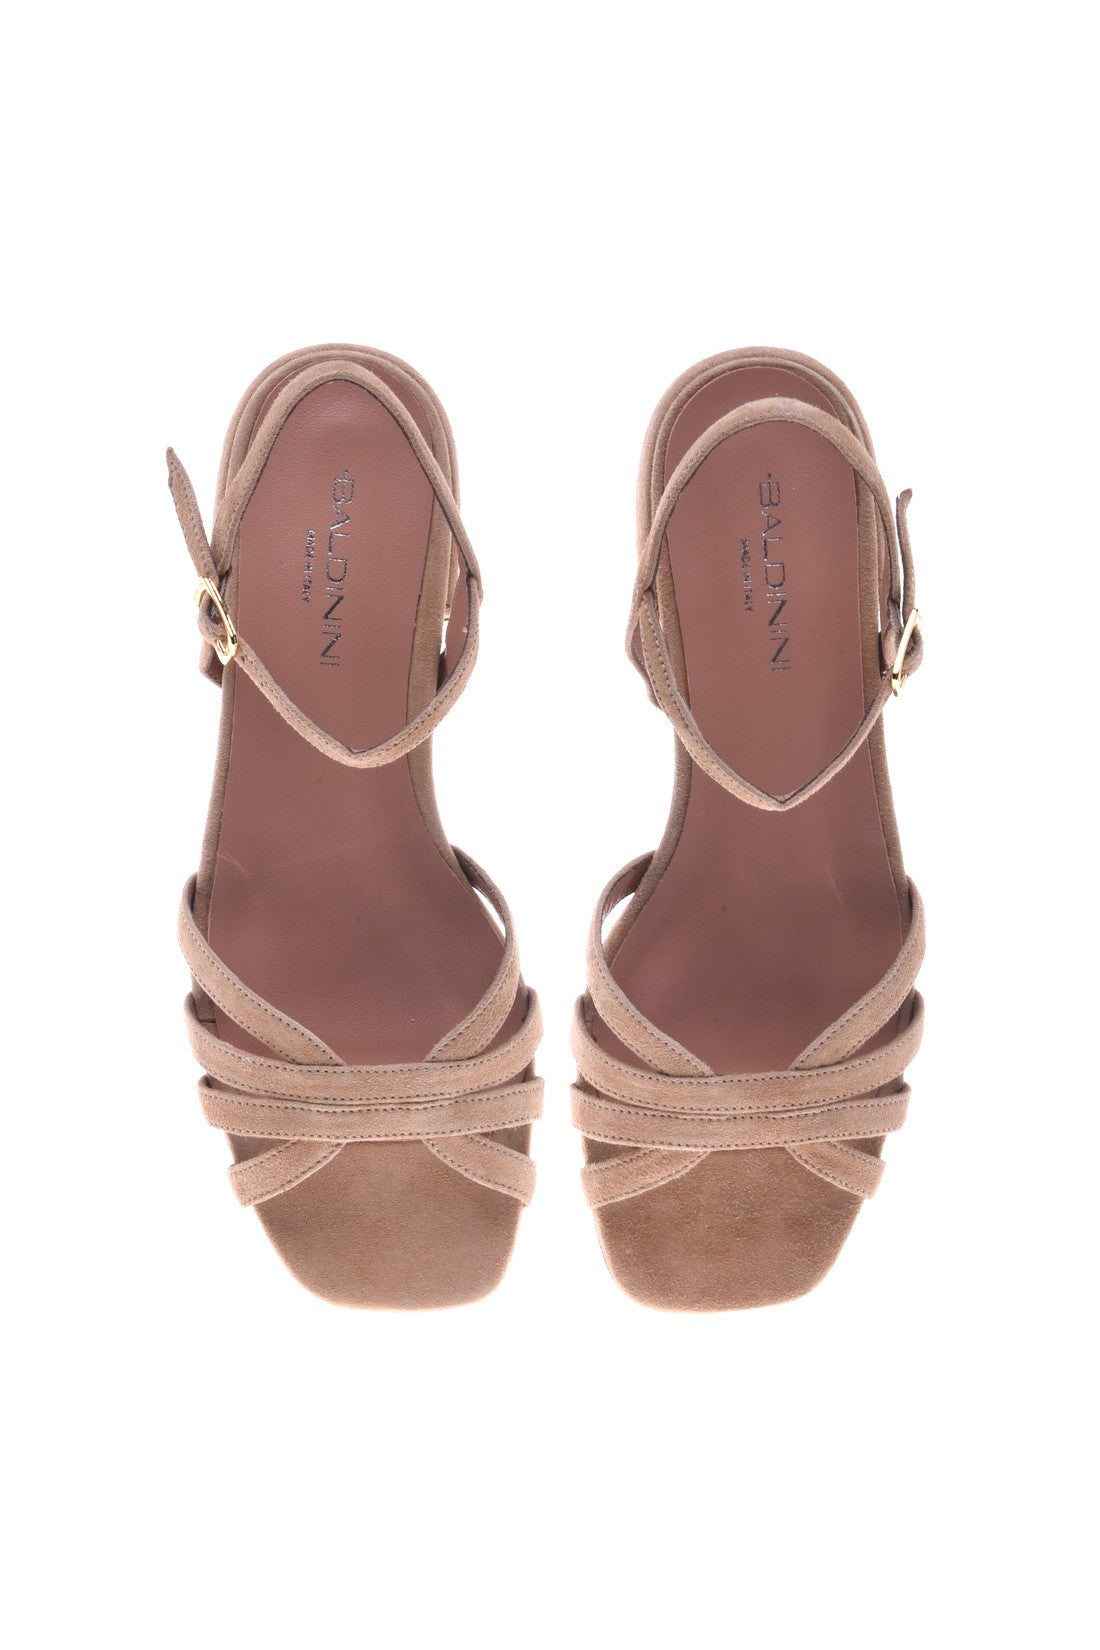 BALDININI-OUTLET-SALE-Sandal-in-taupe-suede-Sandalen-ARCHIVE-COLLECTION-2.jpg